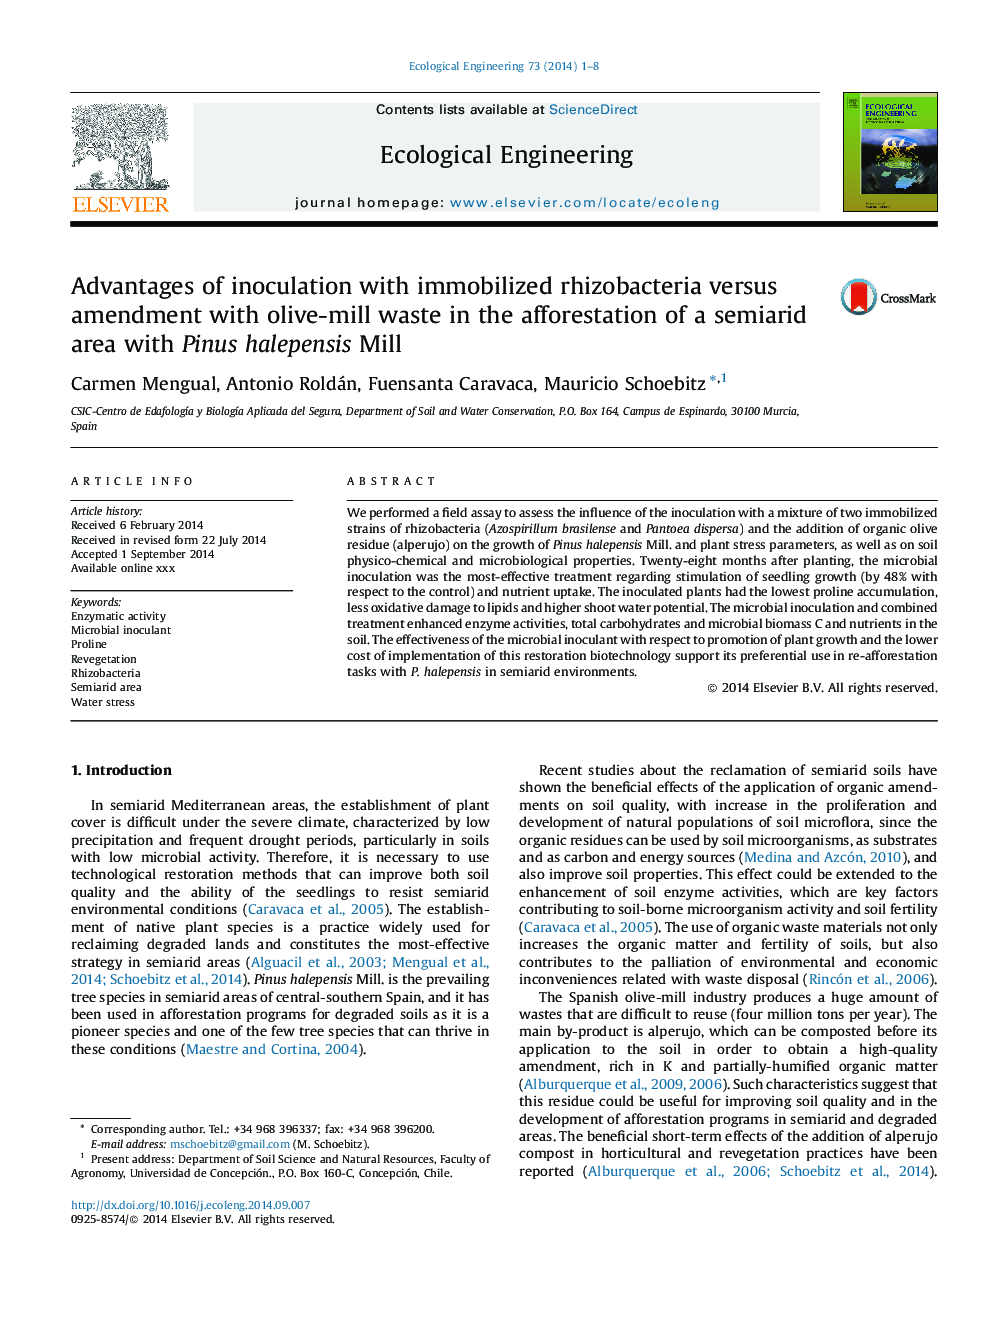 Advantages of inoculation with immobilized rhizobacteria versus amendment with olive-mill waste in the afforestation of a semiarid area with Pinus halepensis Mill